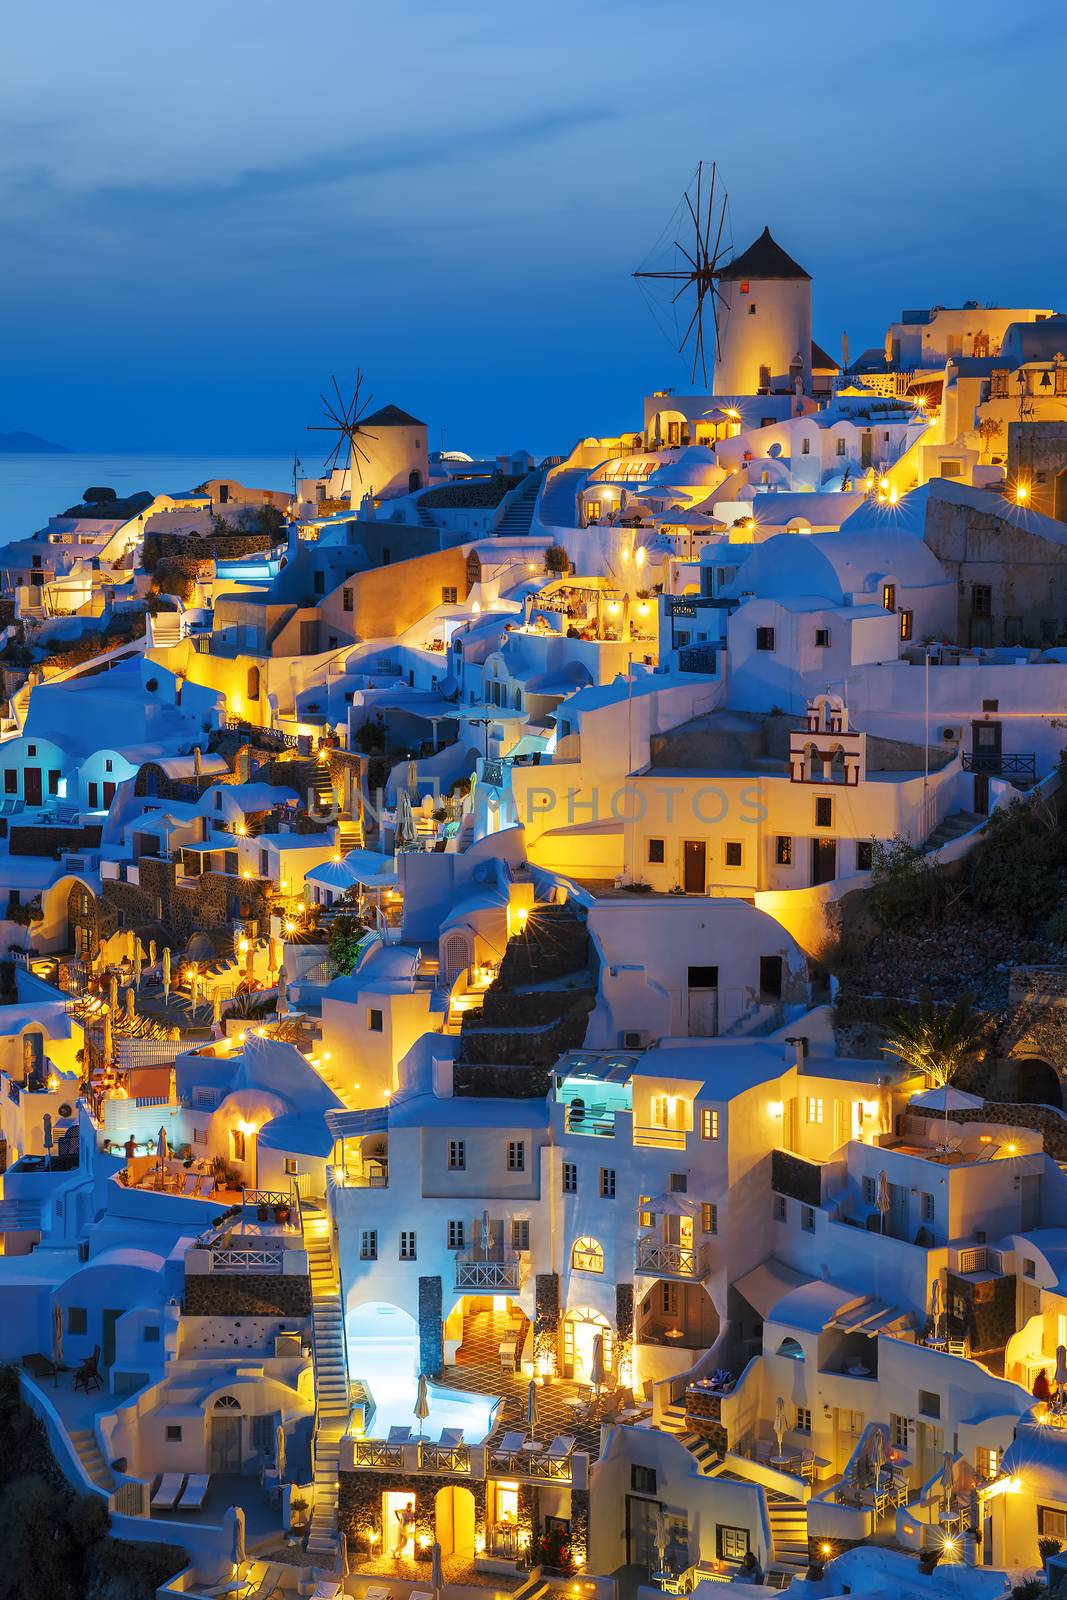 Lights of Oia village at night by vwalakte